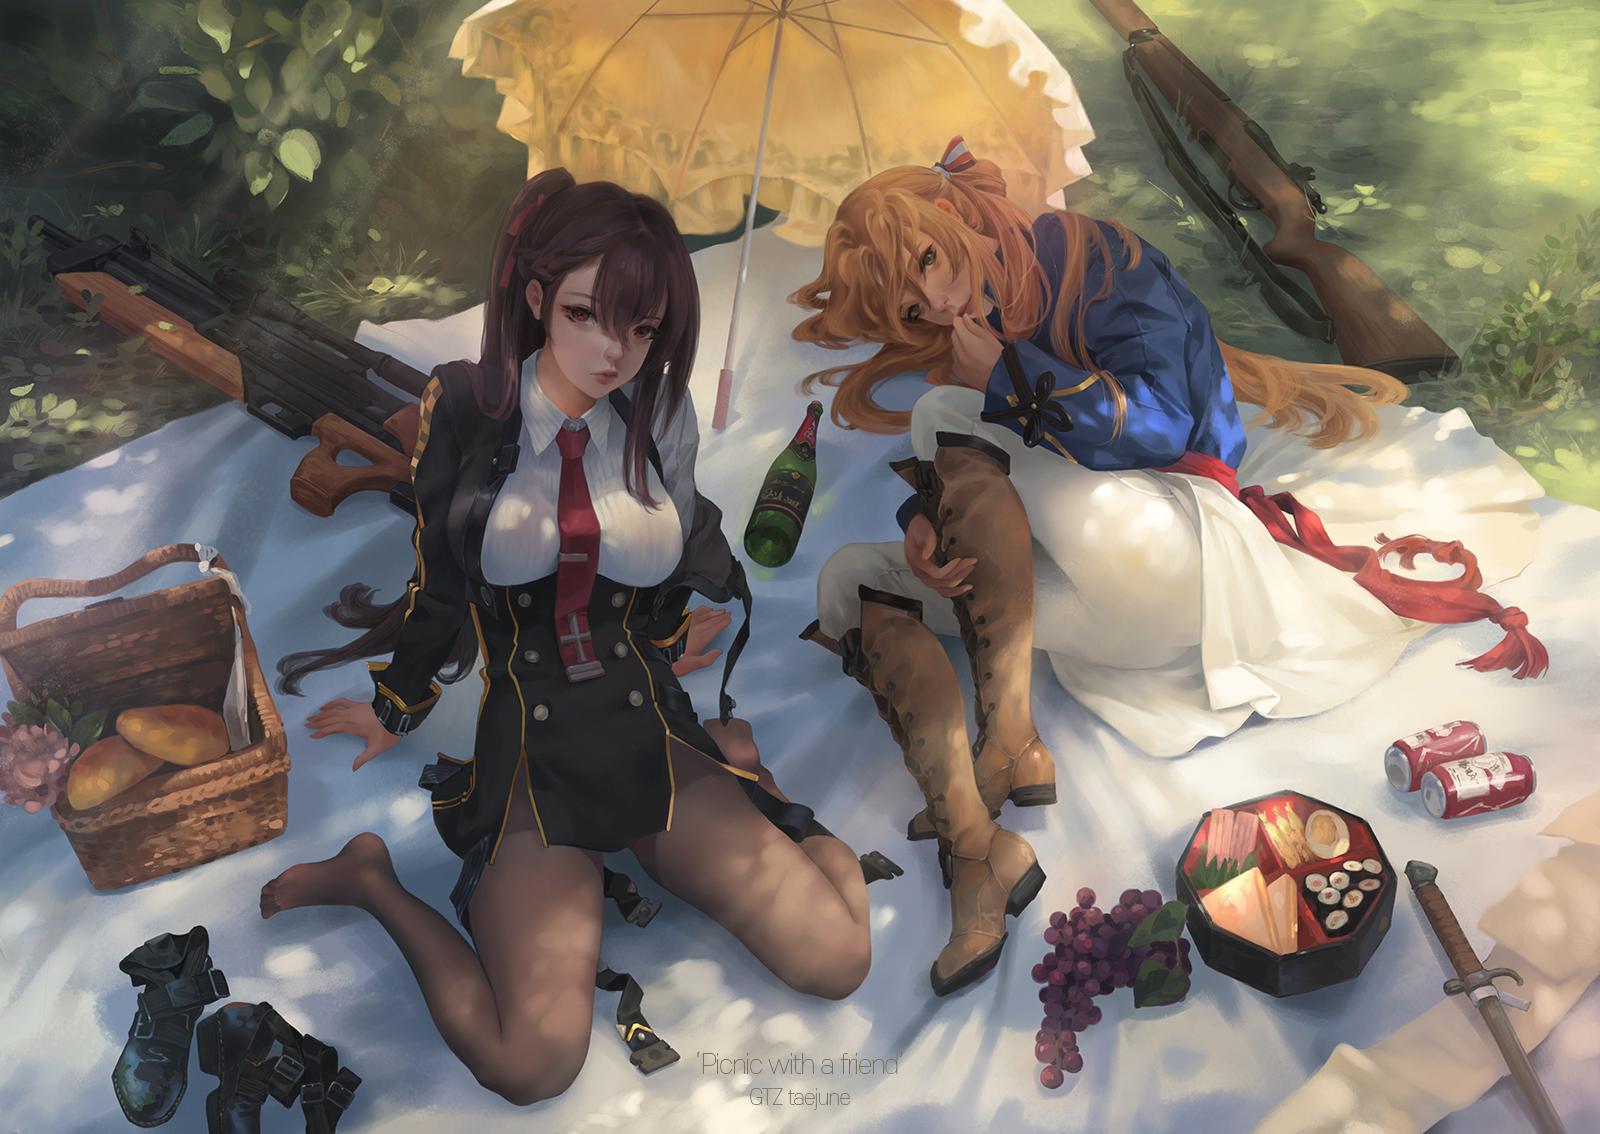 Picnic with a friend